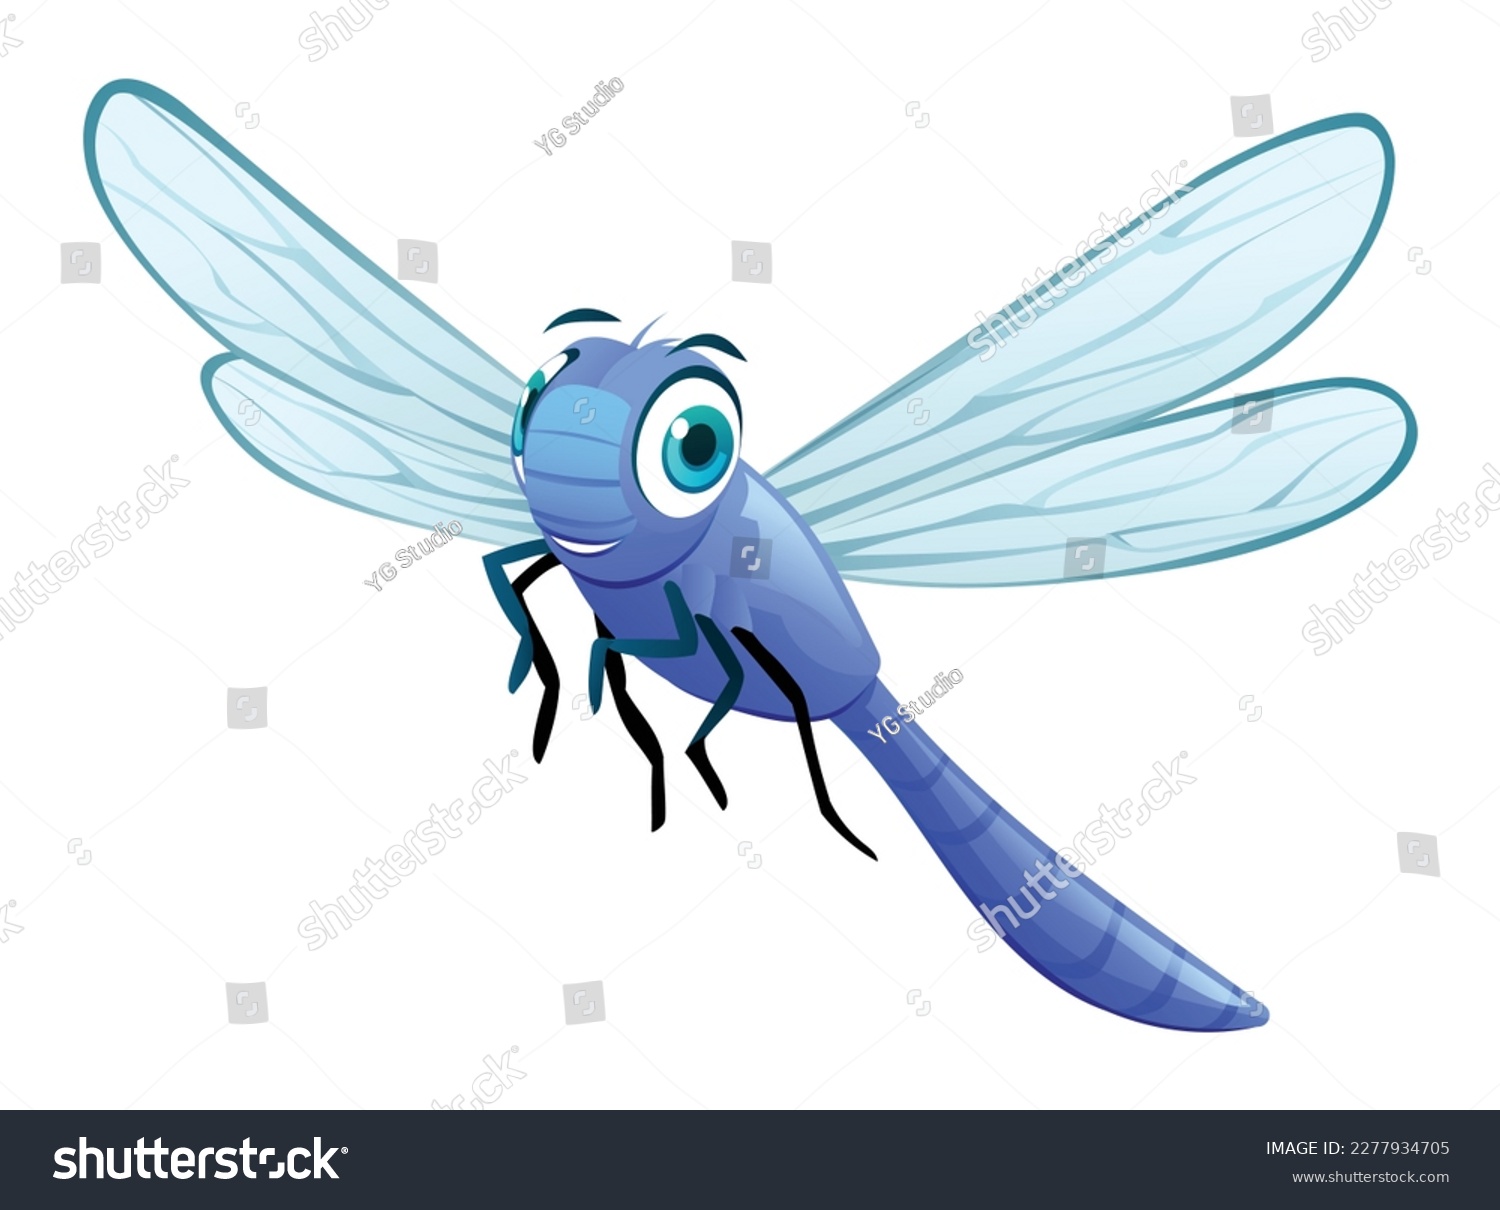 Cute dragonfly cartoon illustration isolated on white background #2277934705